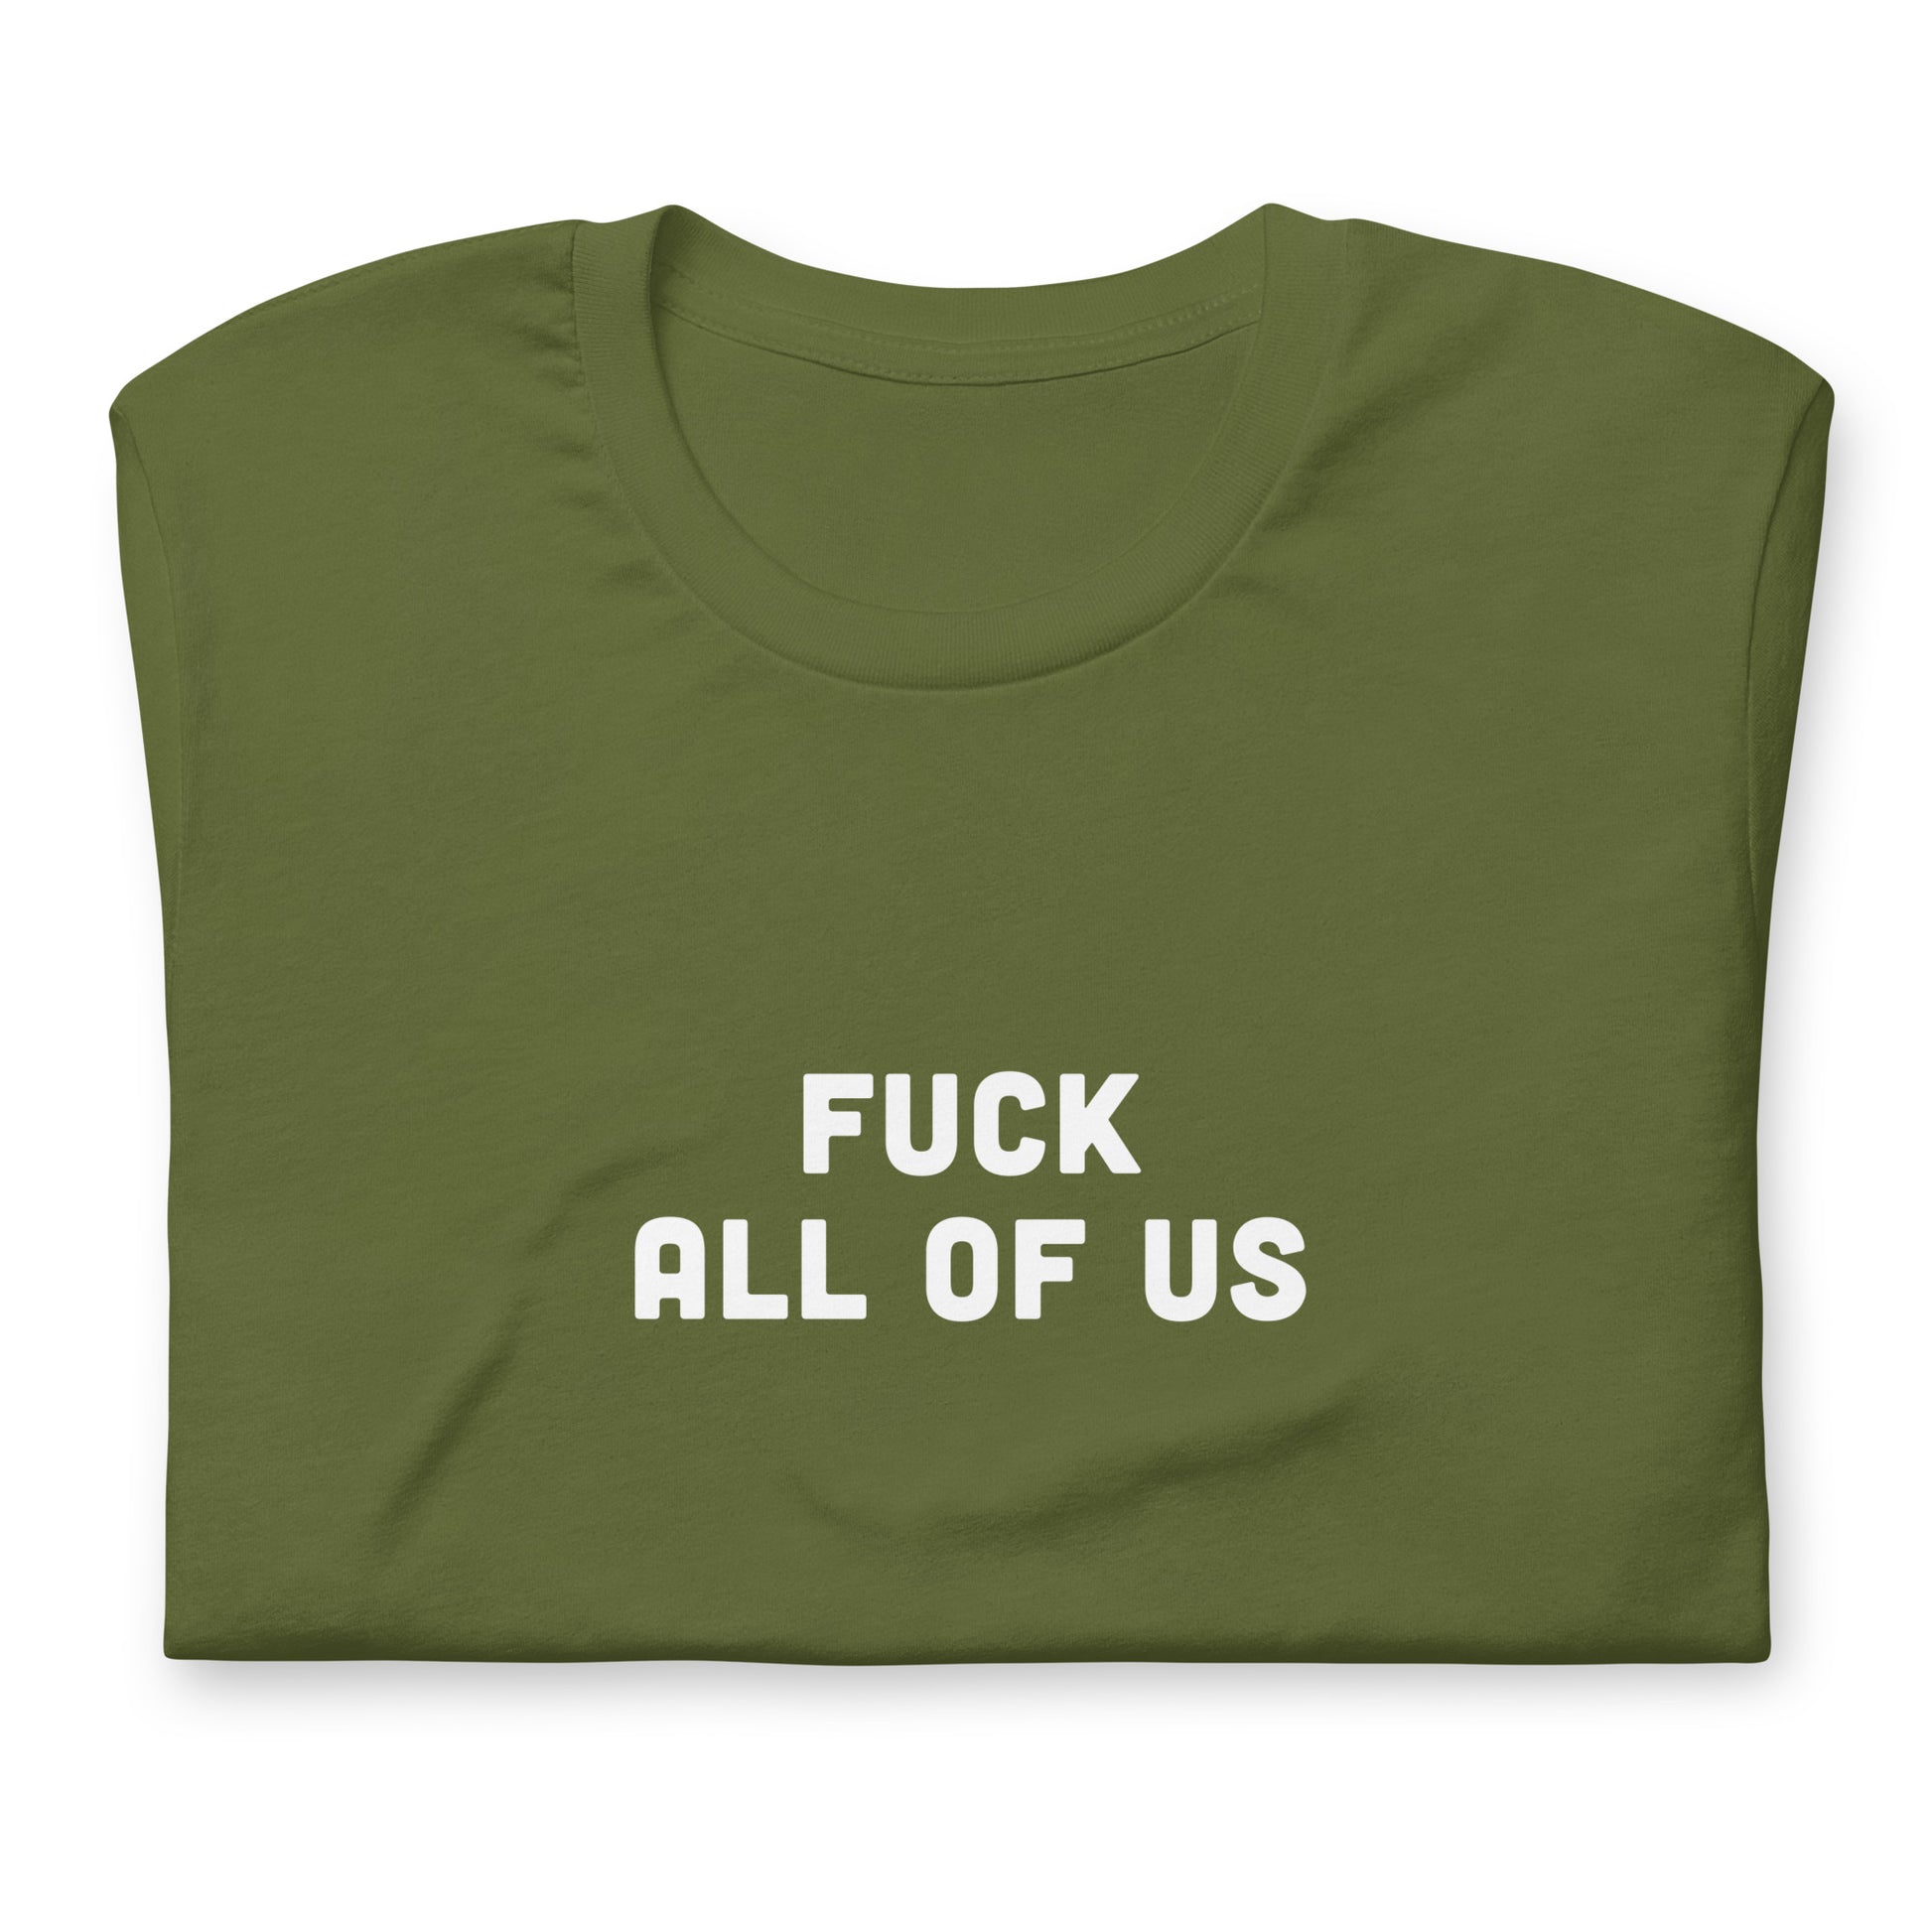 Fuck All Of Us T-Shirt Size 2XL Color Black